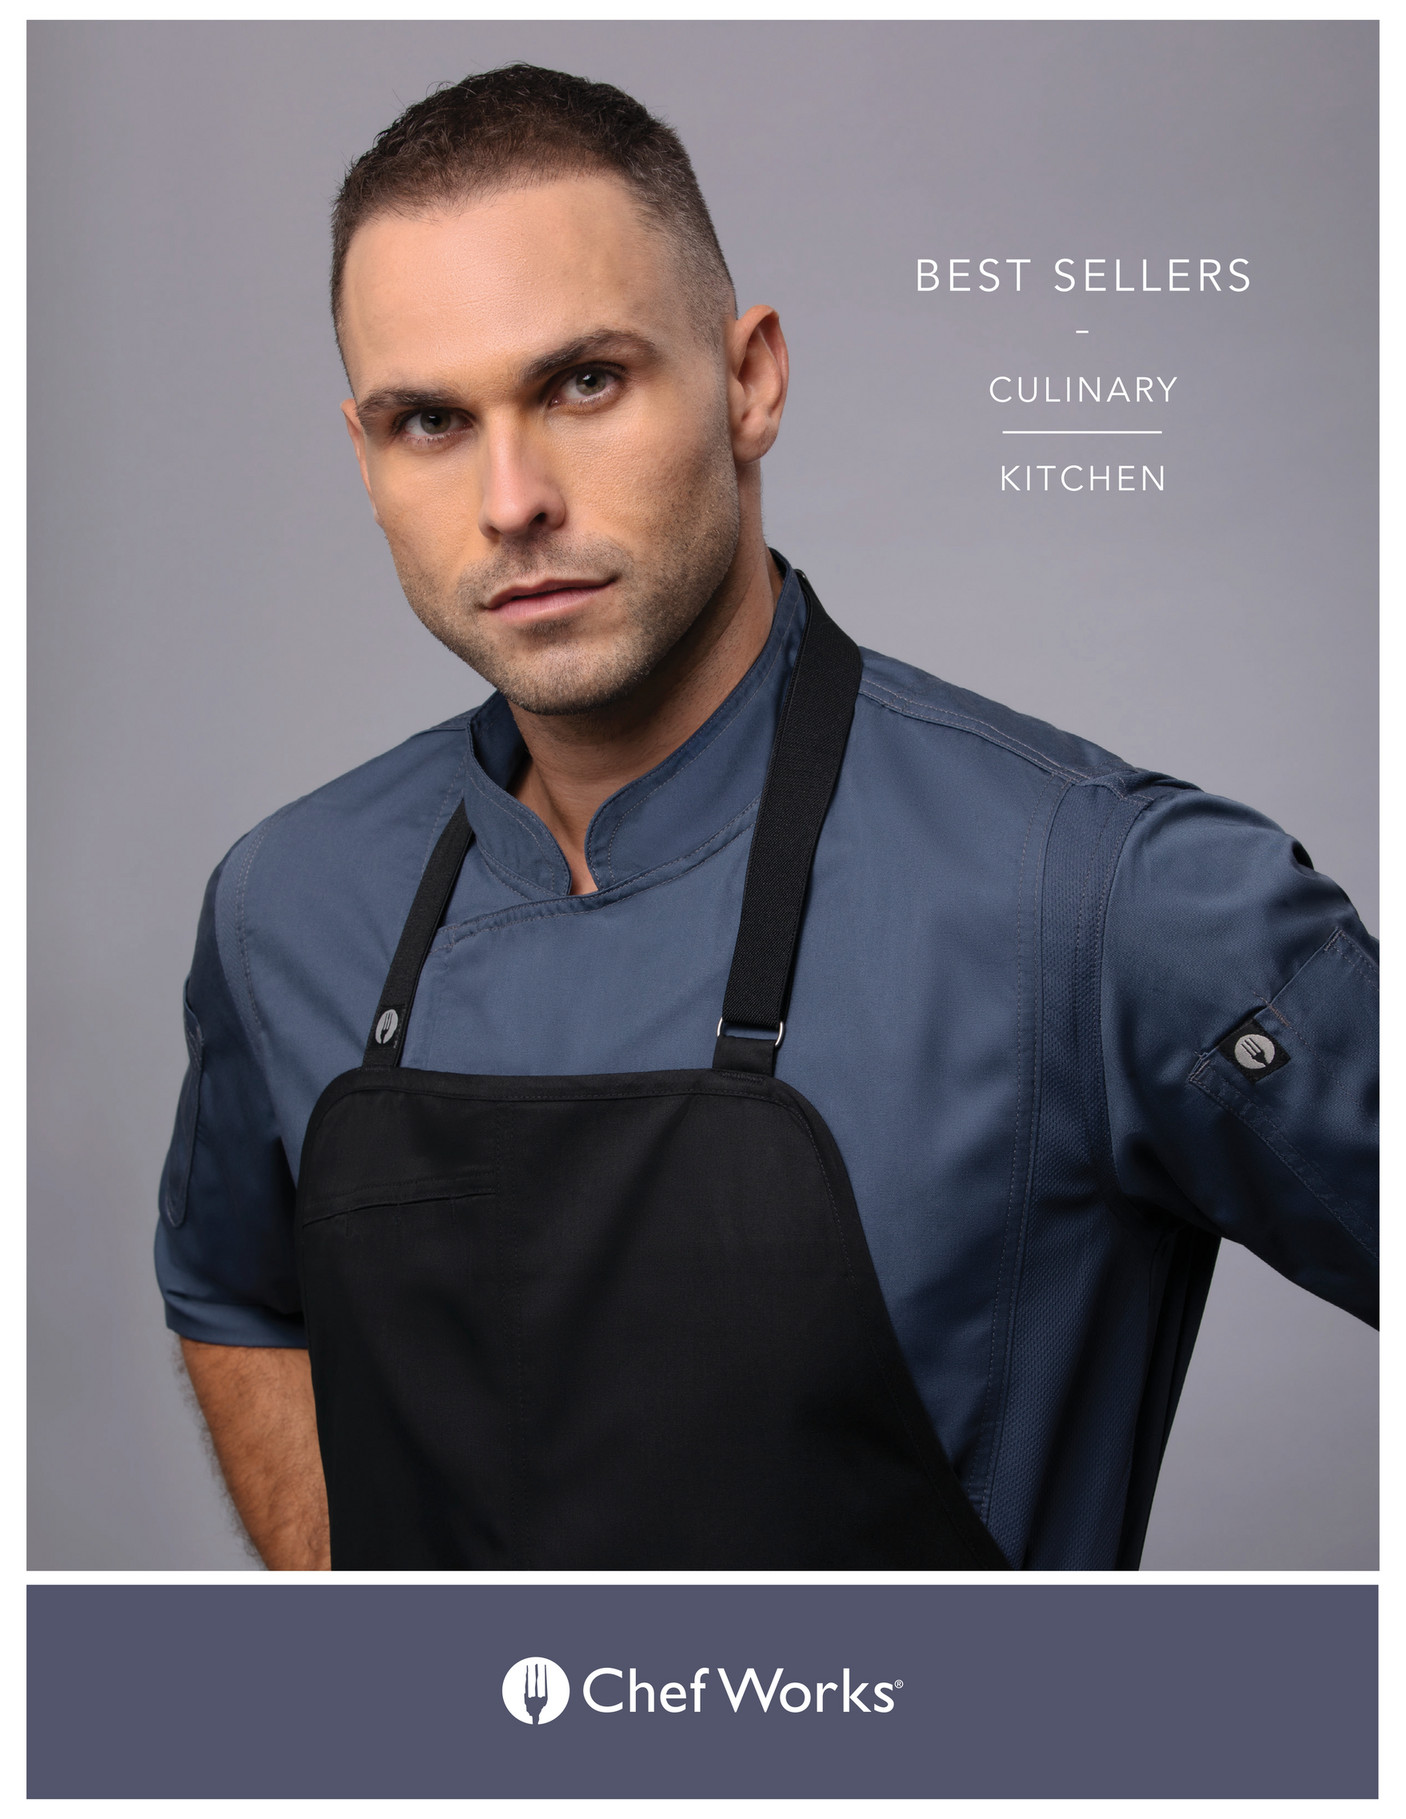 Chef Works Best Sellers Culinary + Kitchen Catalog - Page 36-37